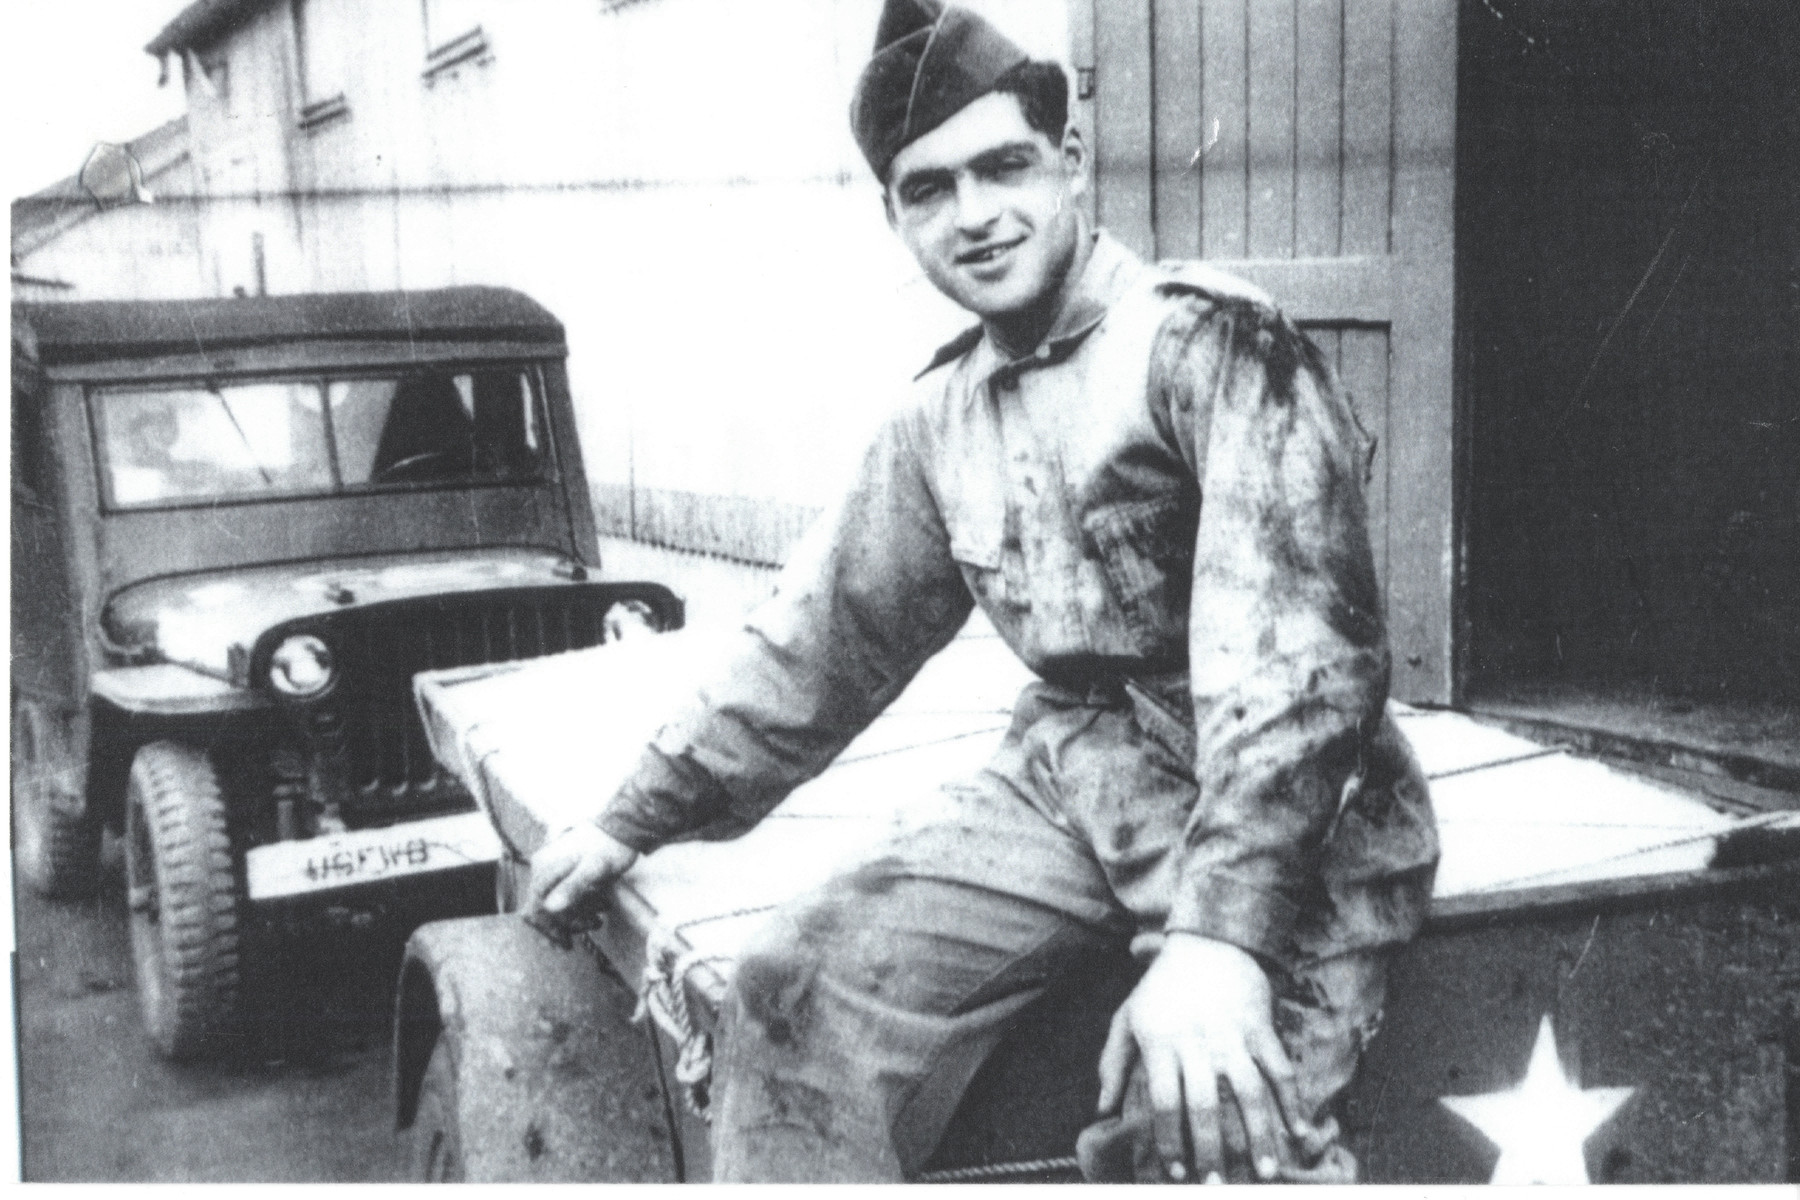 David Marcus seated on a military vehicle.